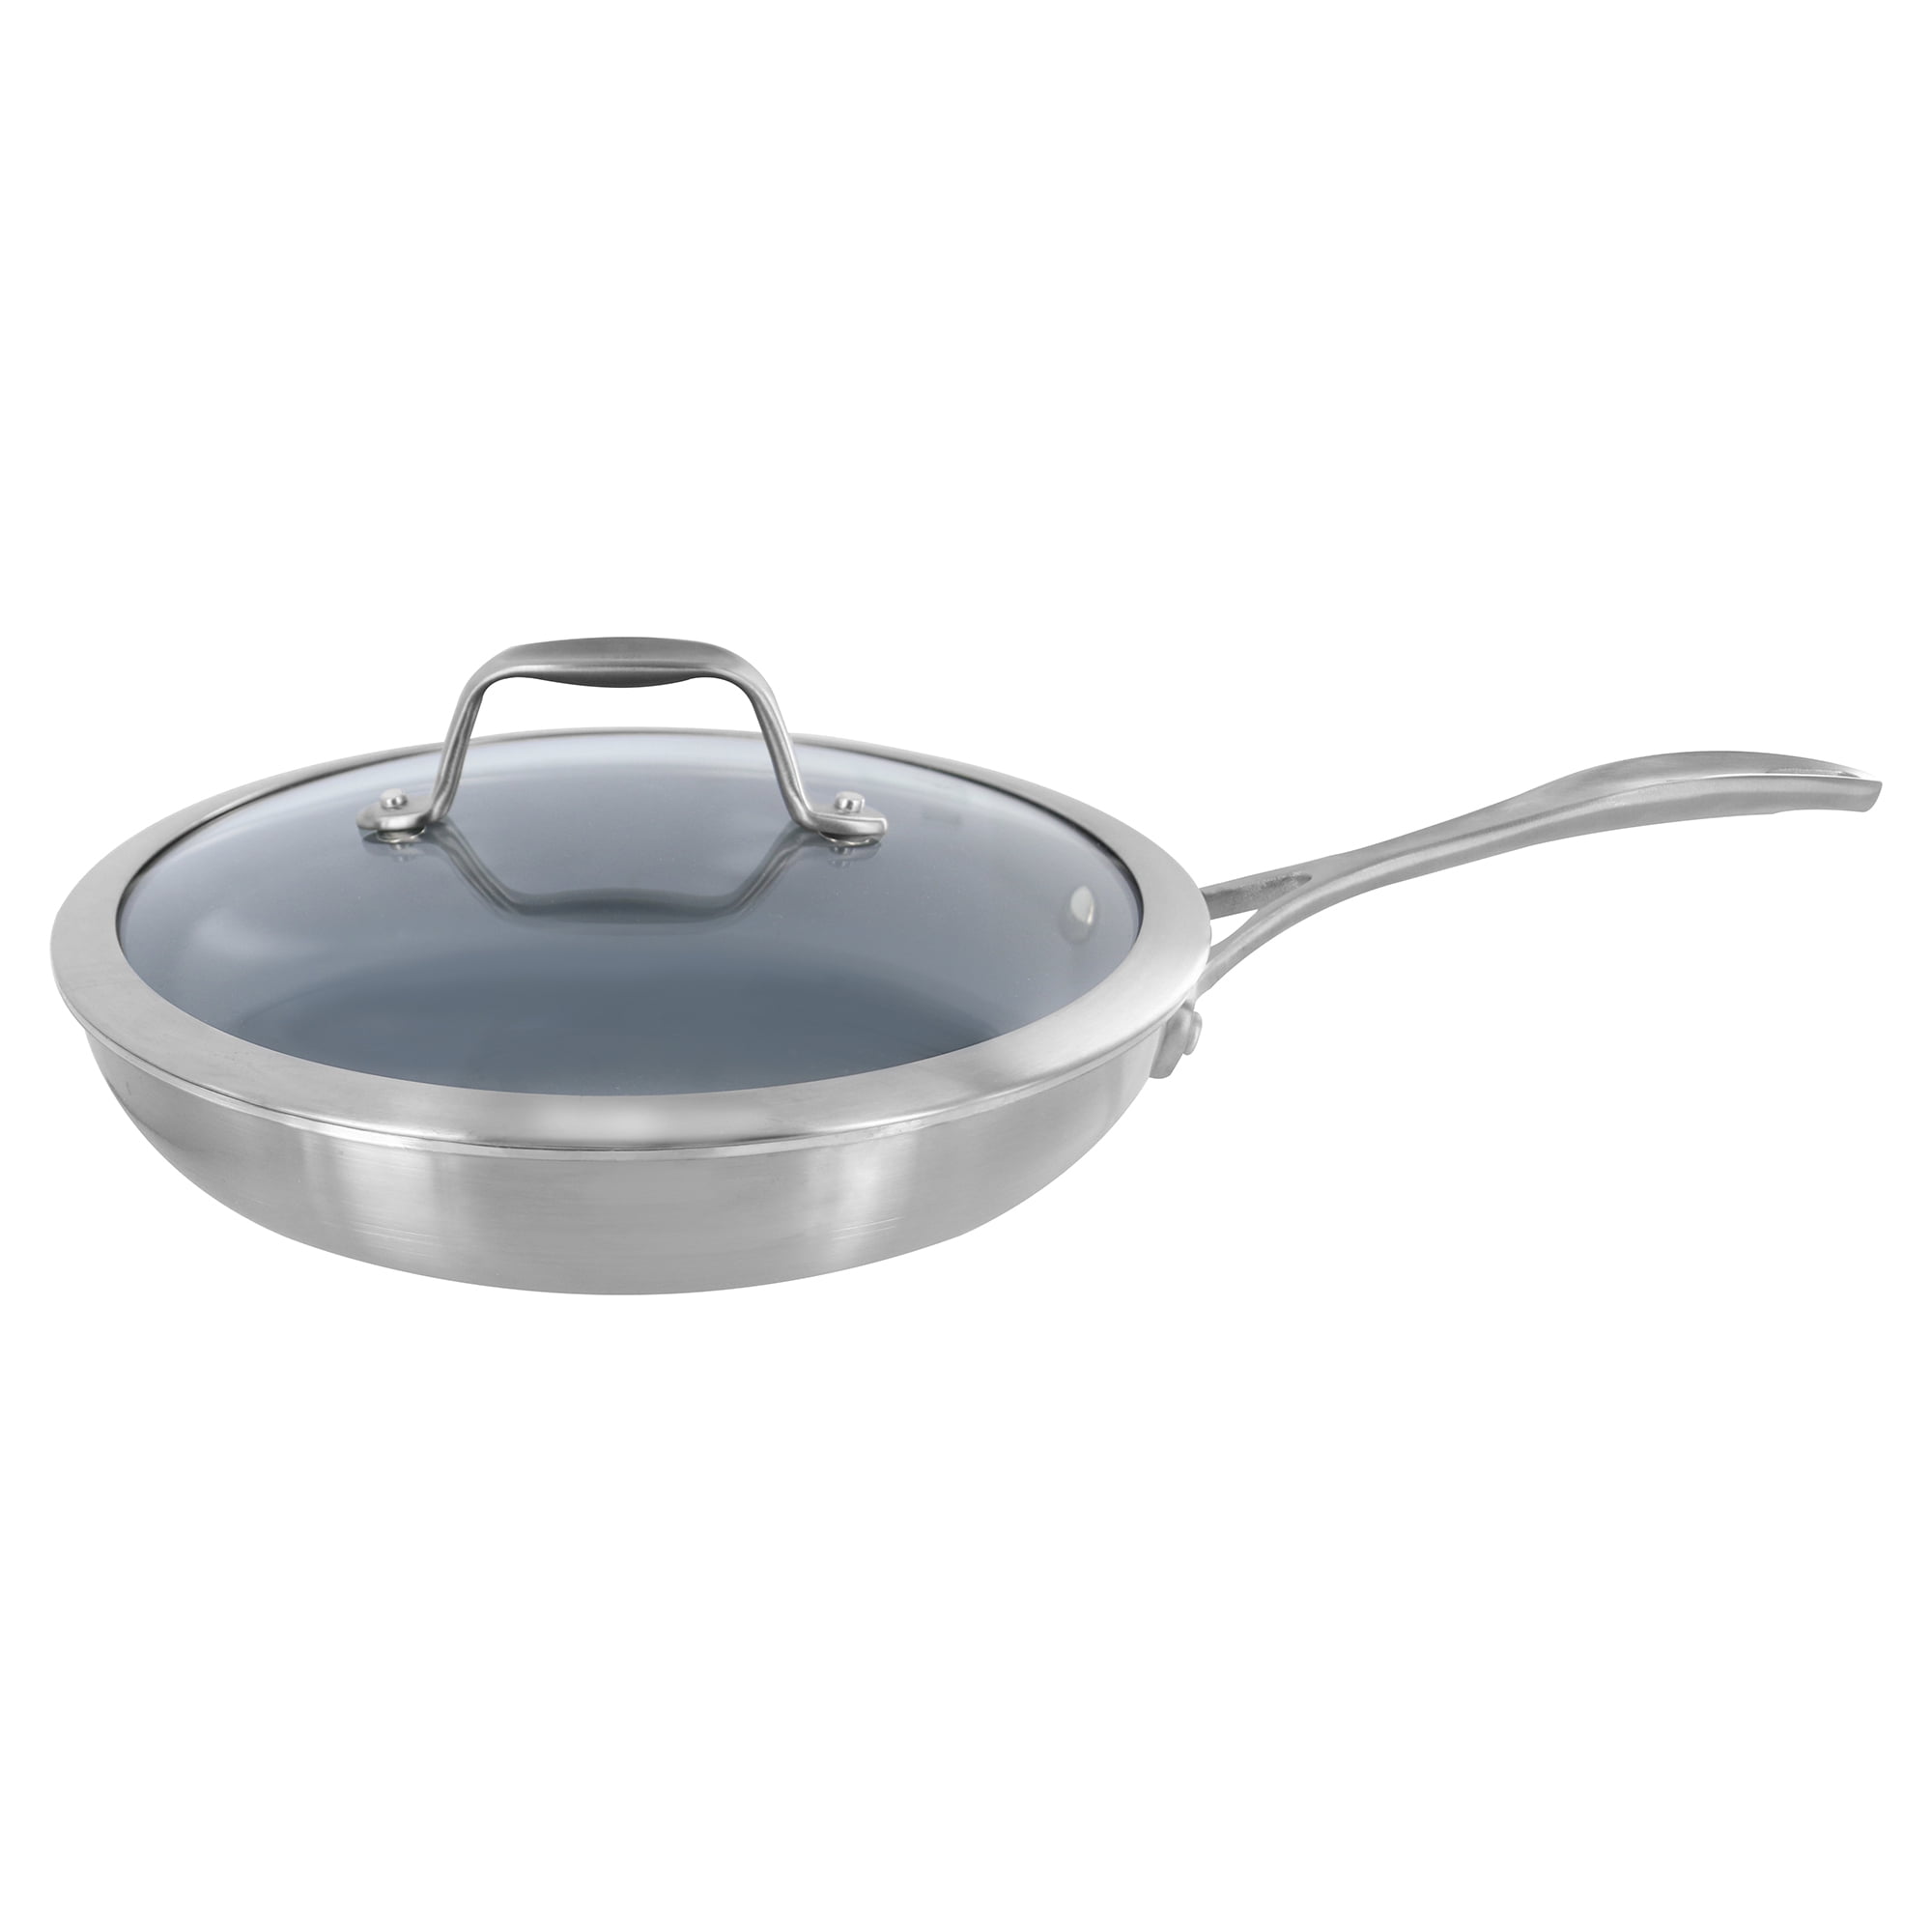  Vinchef Nonstick Skillet with Lid 13 Inch Stainless